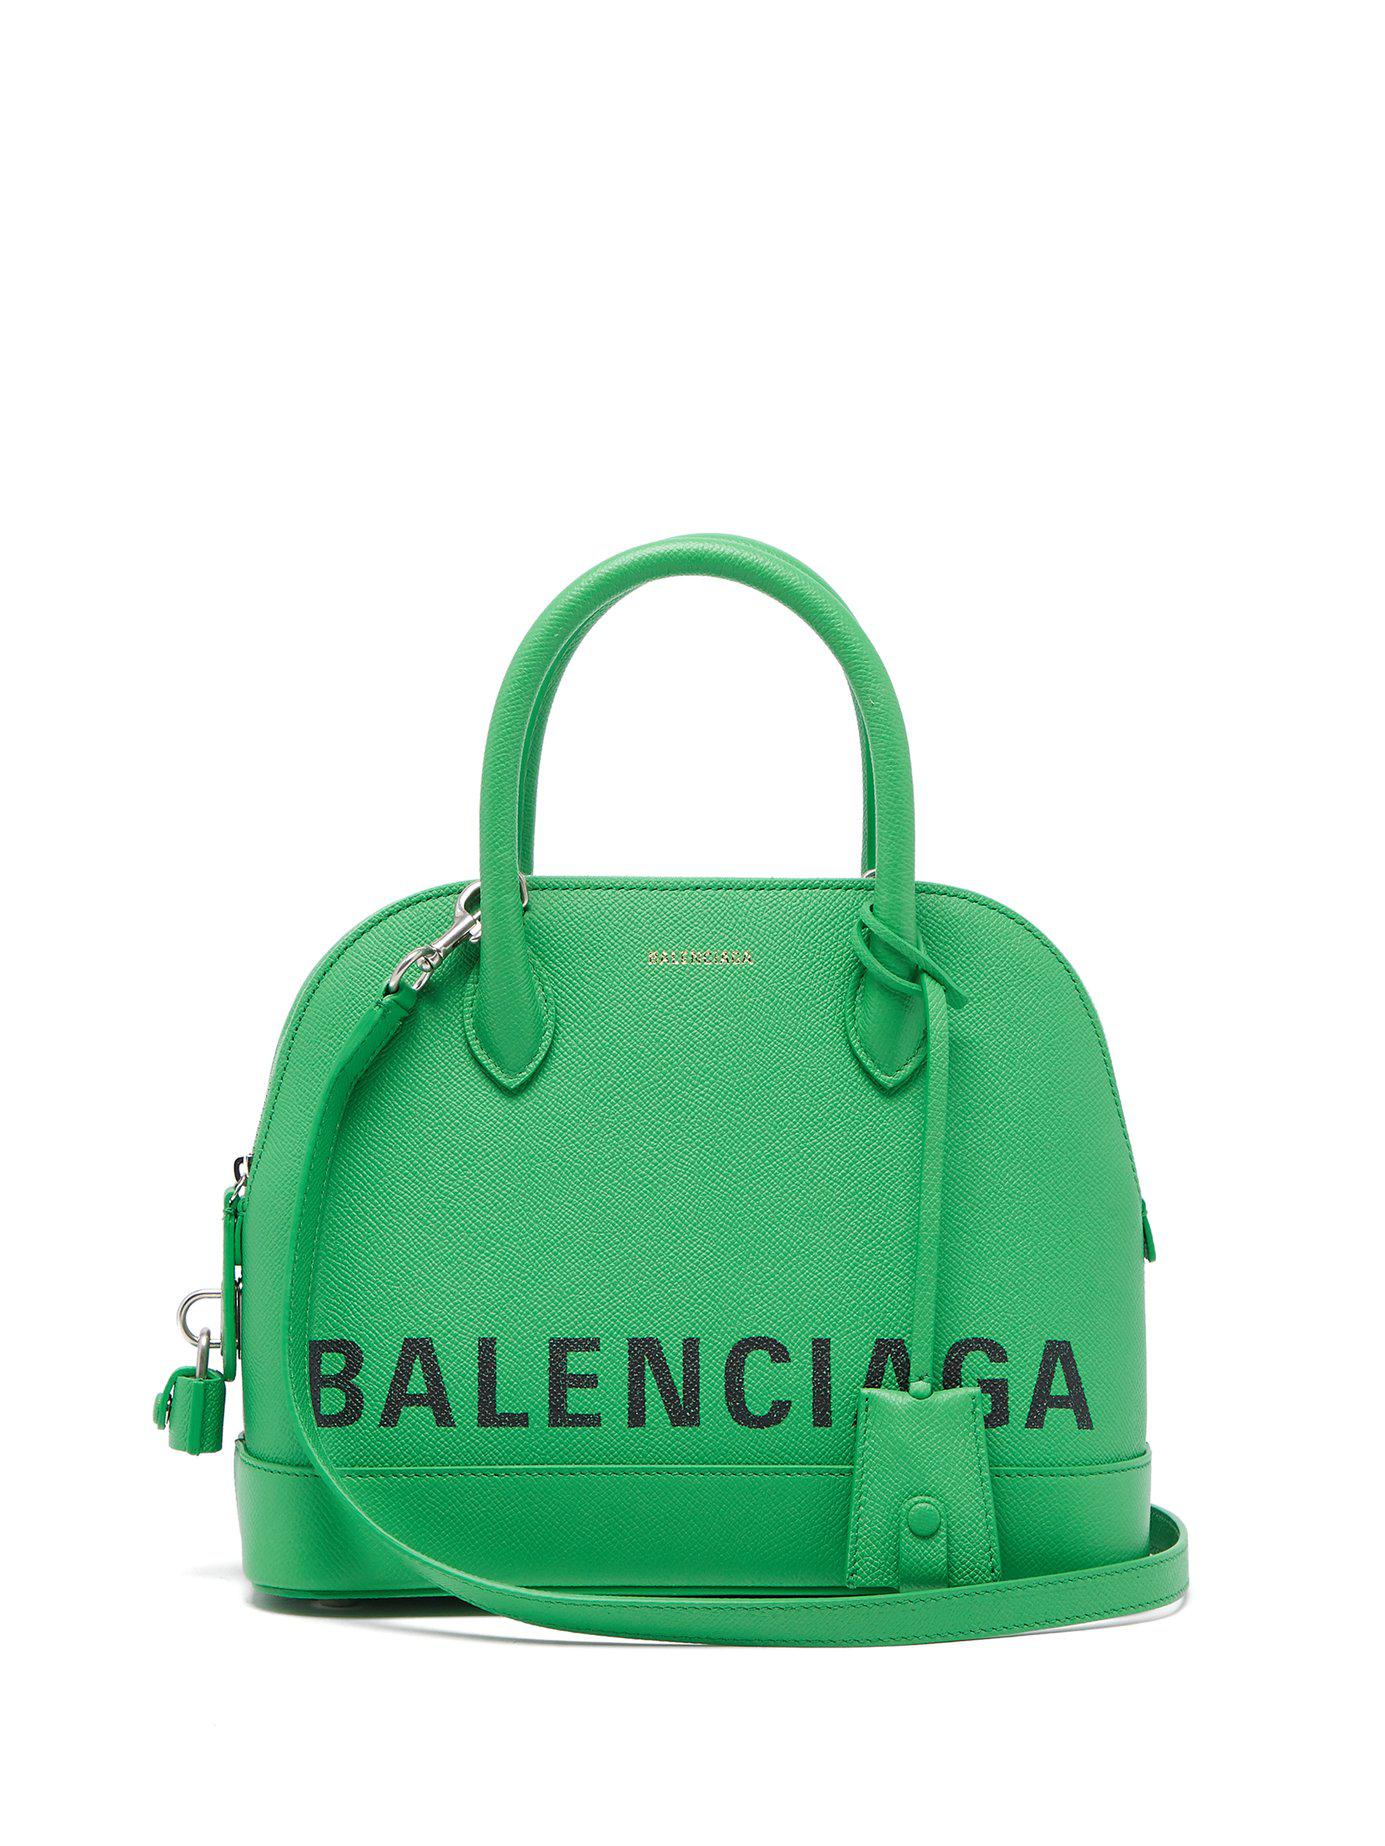 Balenciaga Leather Ville Top Handle S Bag in Green | Lyst